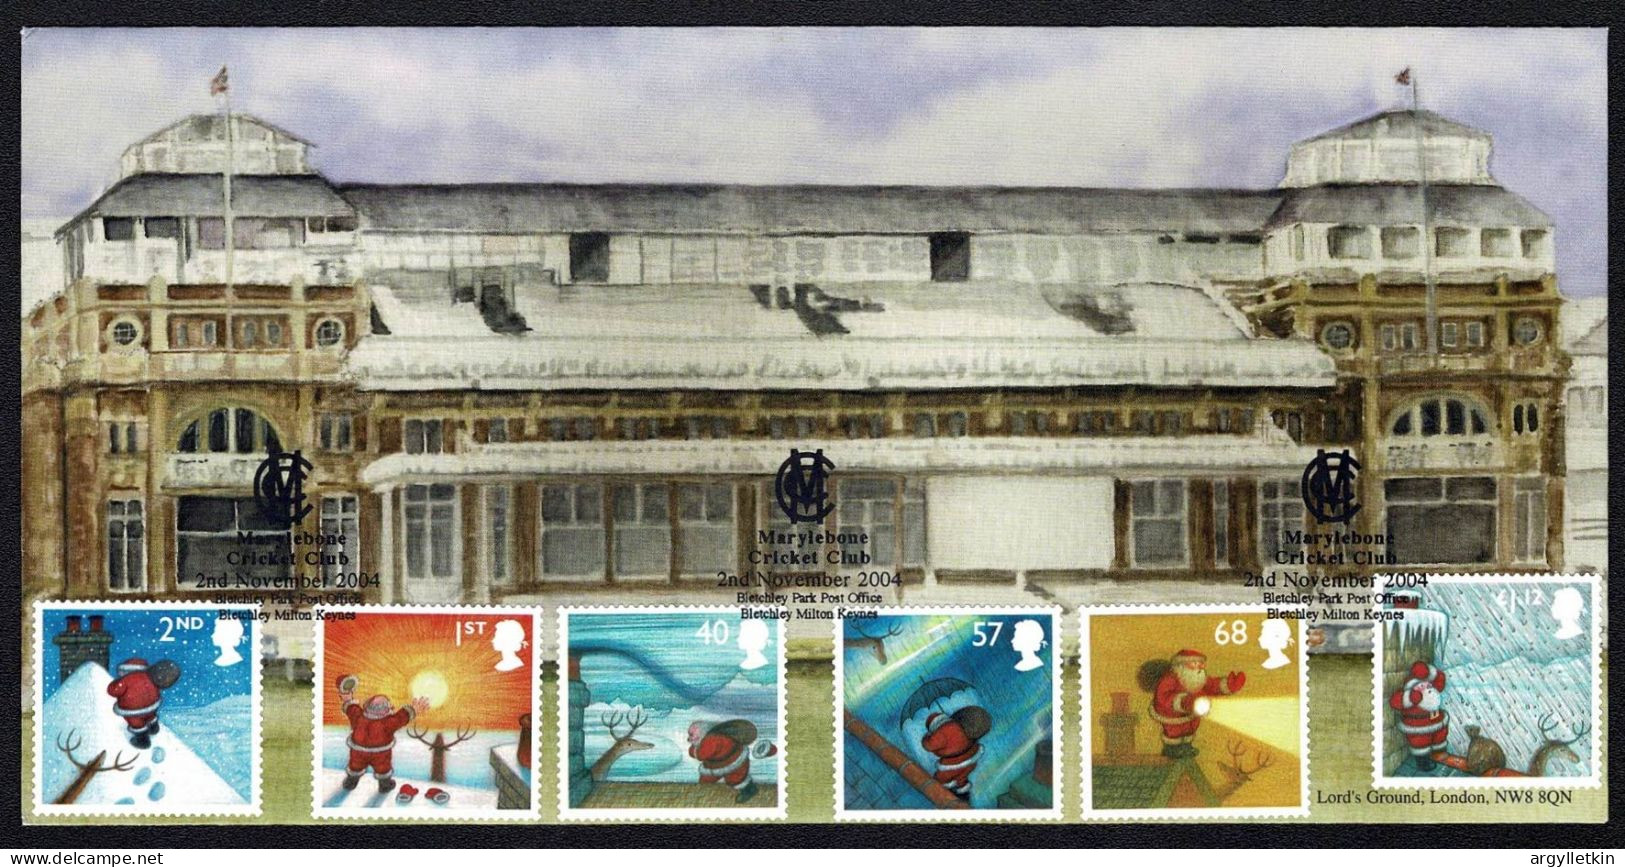 GB 2004 LORDS CRICKET CHRISTMAS ISSUE BLETCHLEY COVER - 2001-2010 Decimal Issues